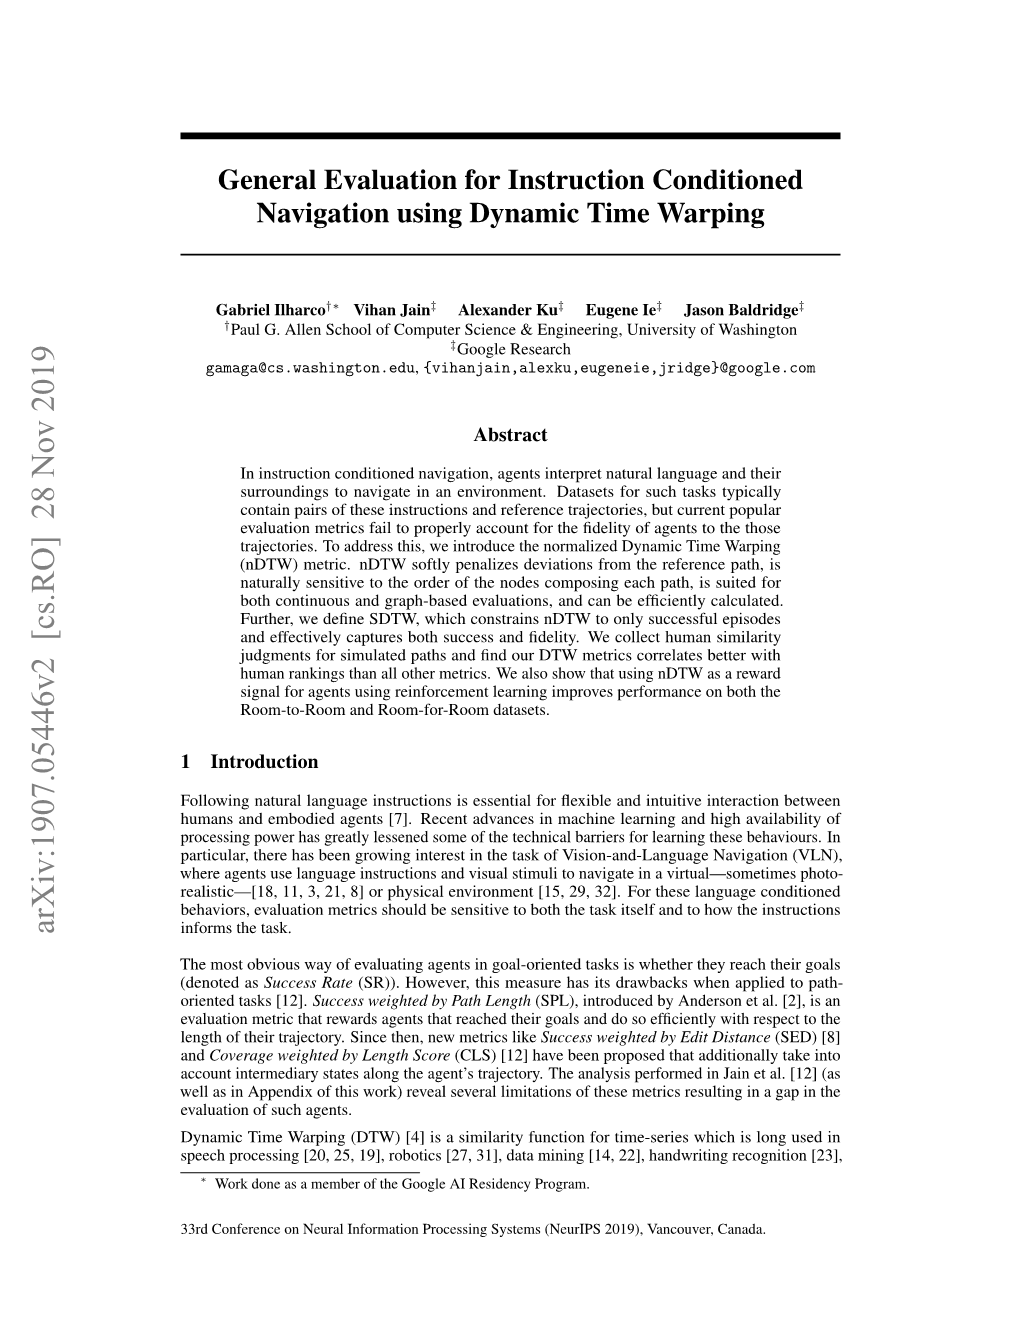 General Evaluation for Instruction Conditioned Navigation Using Dynamic Time Warping